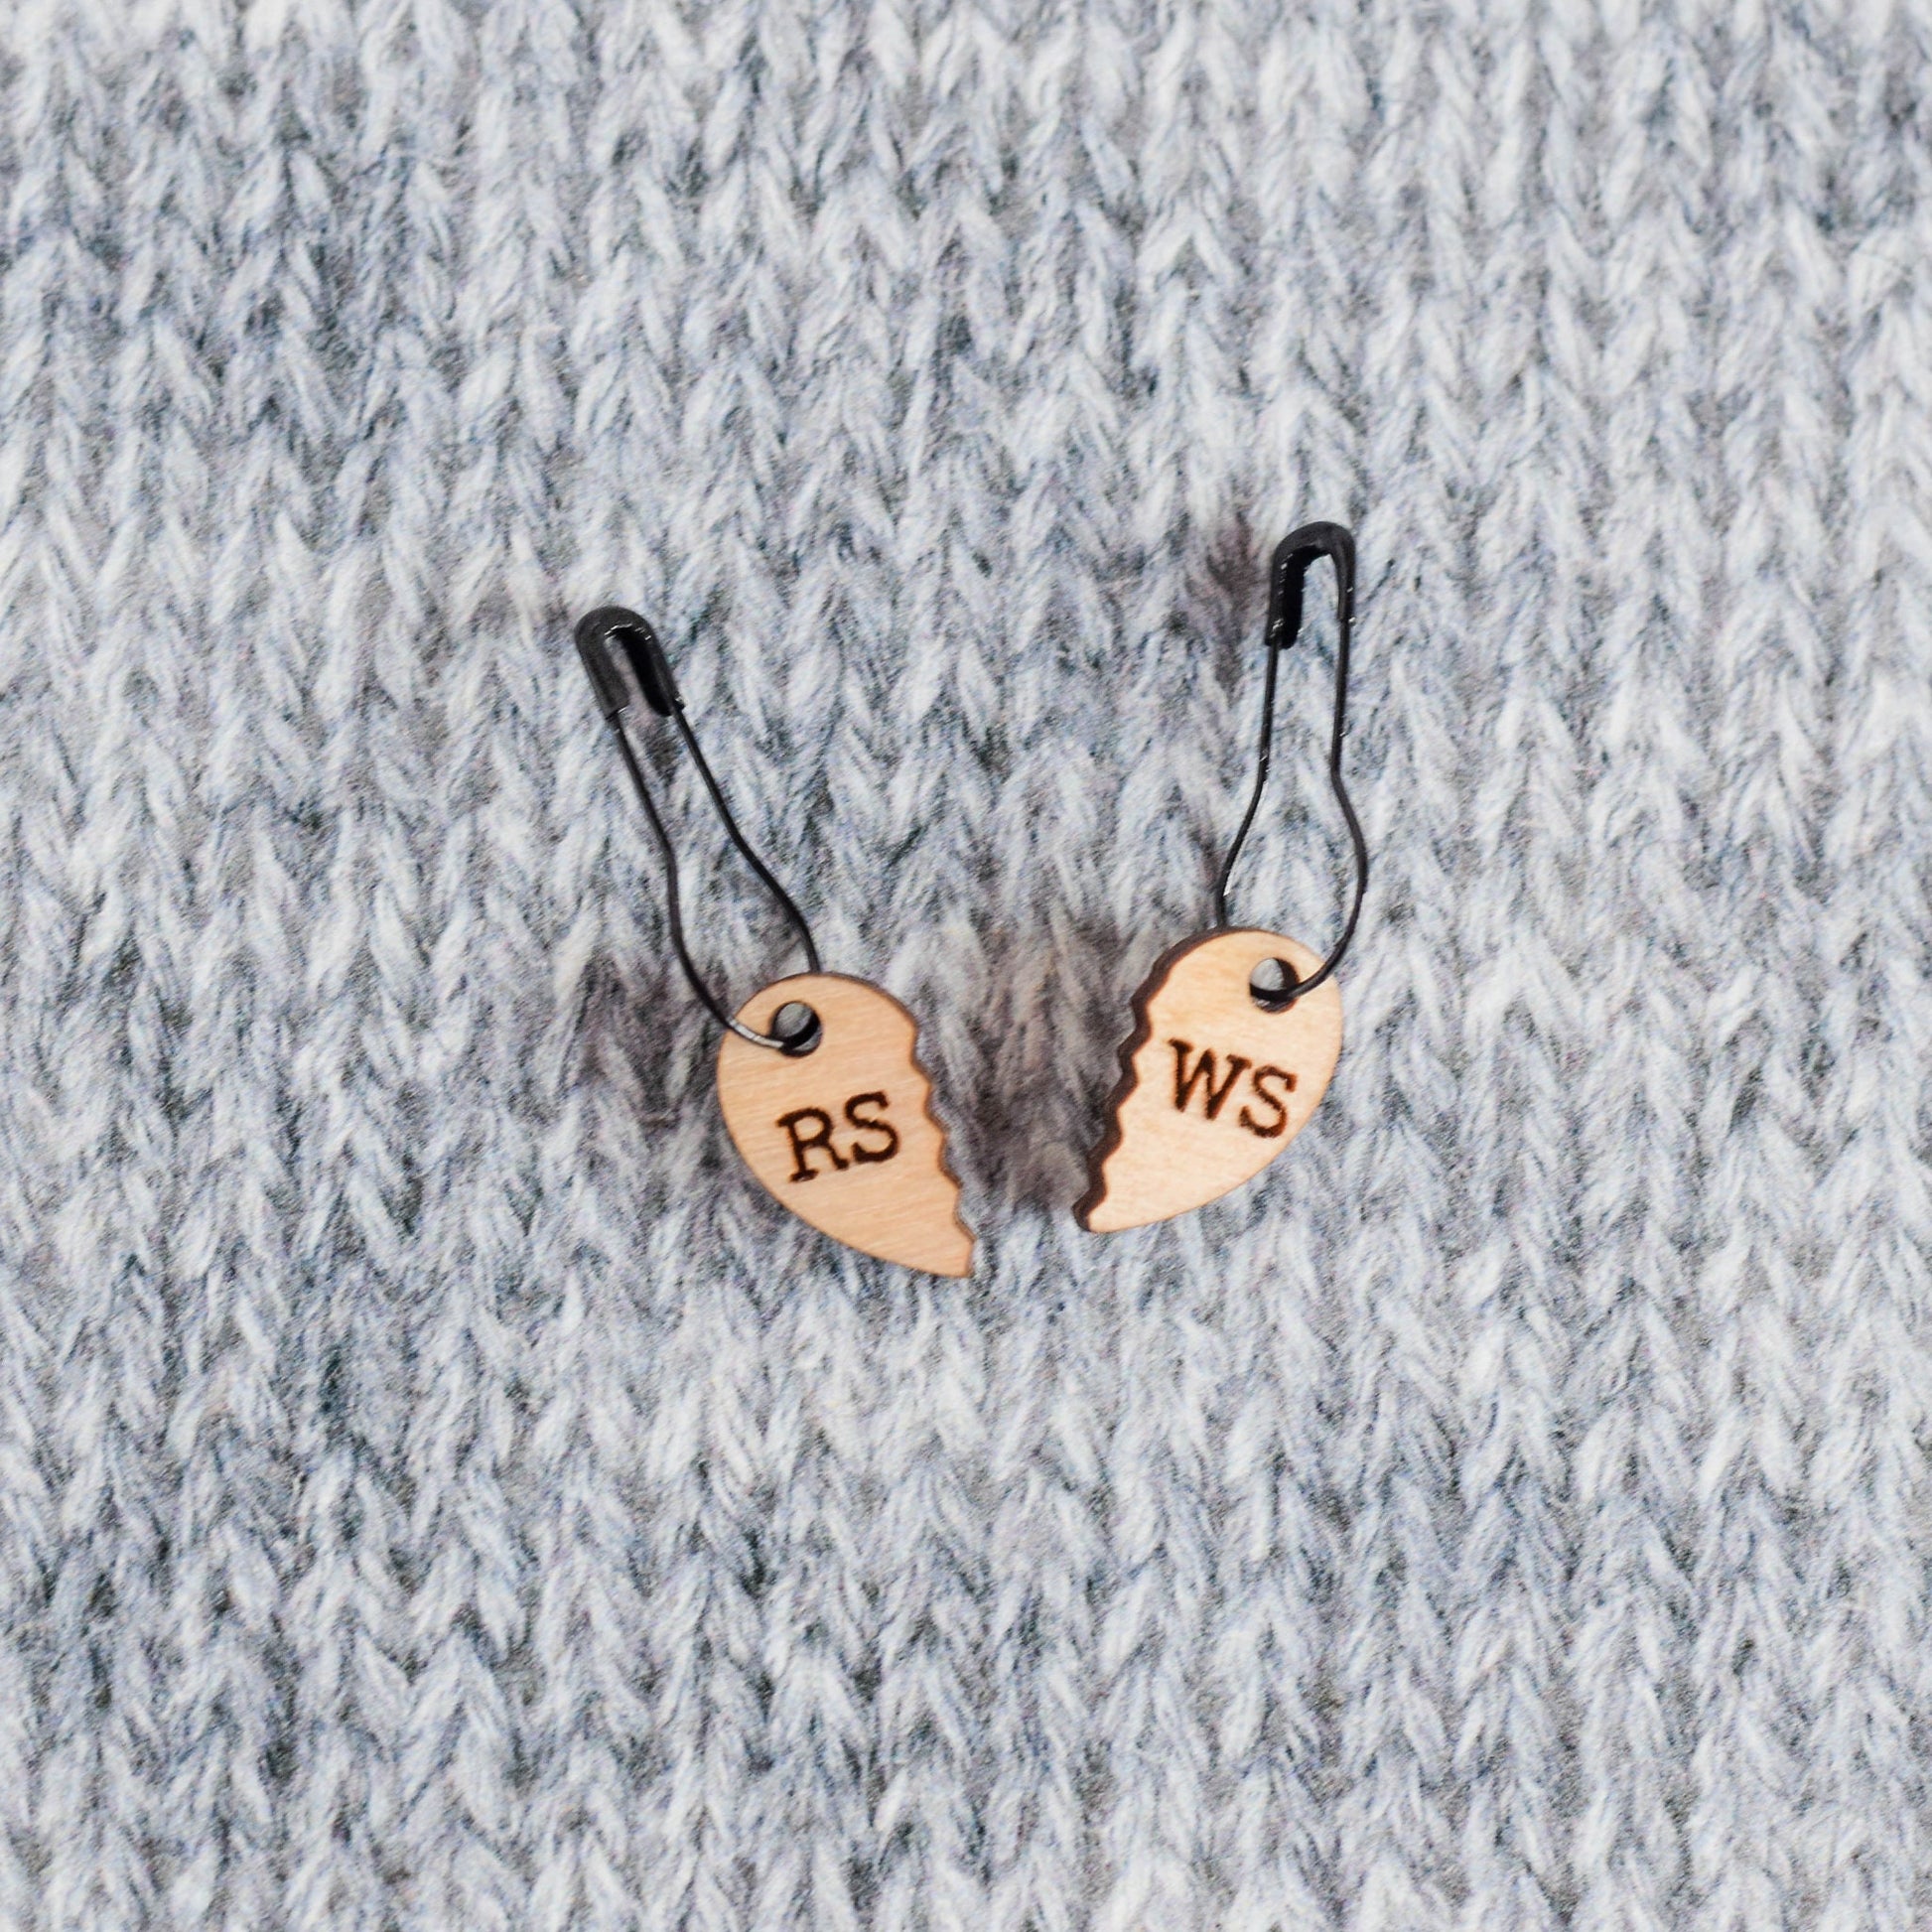 Set of 2 Removable Stitch Markers - RS and WS Broken Heart - Laser Engraved Wood Stitch Markers, Right Wrong Side, Sweater Stitch Markers